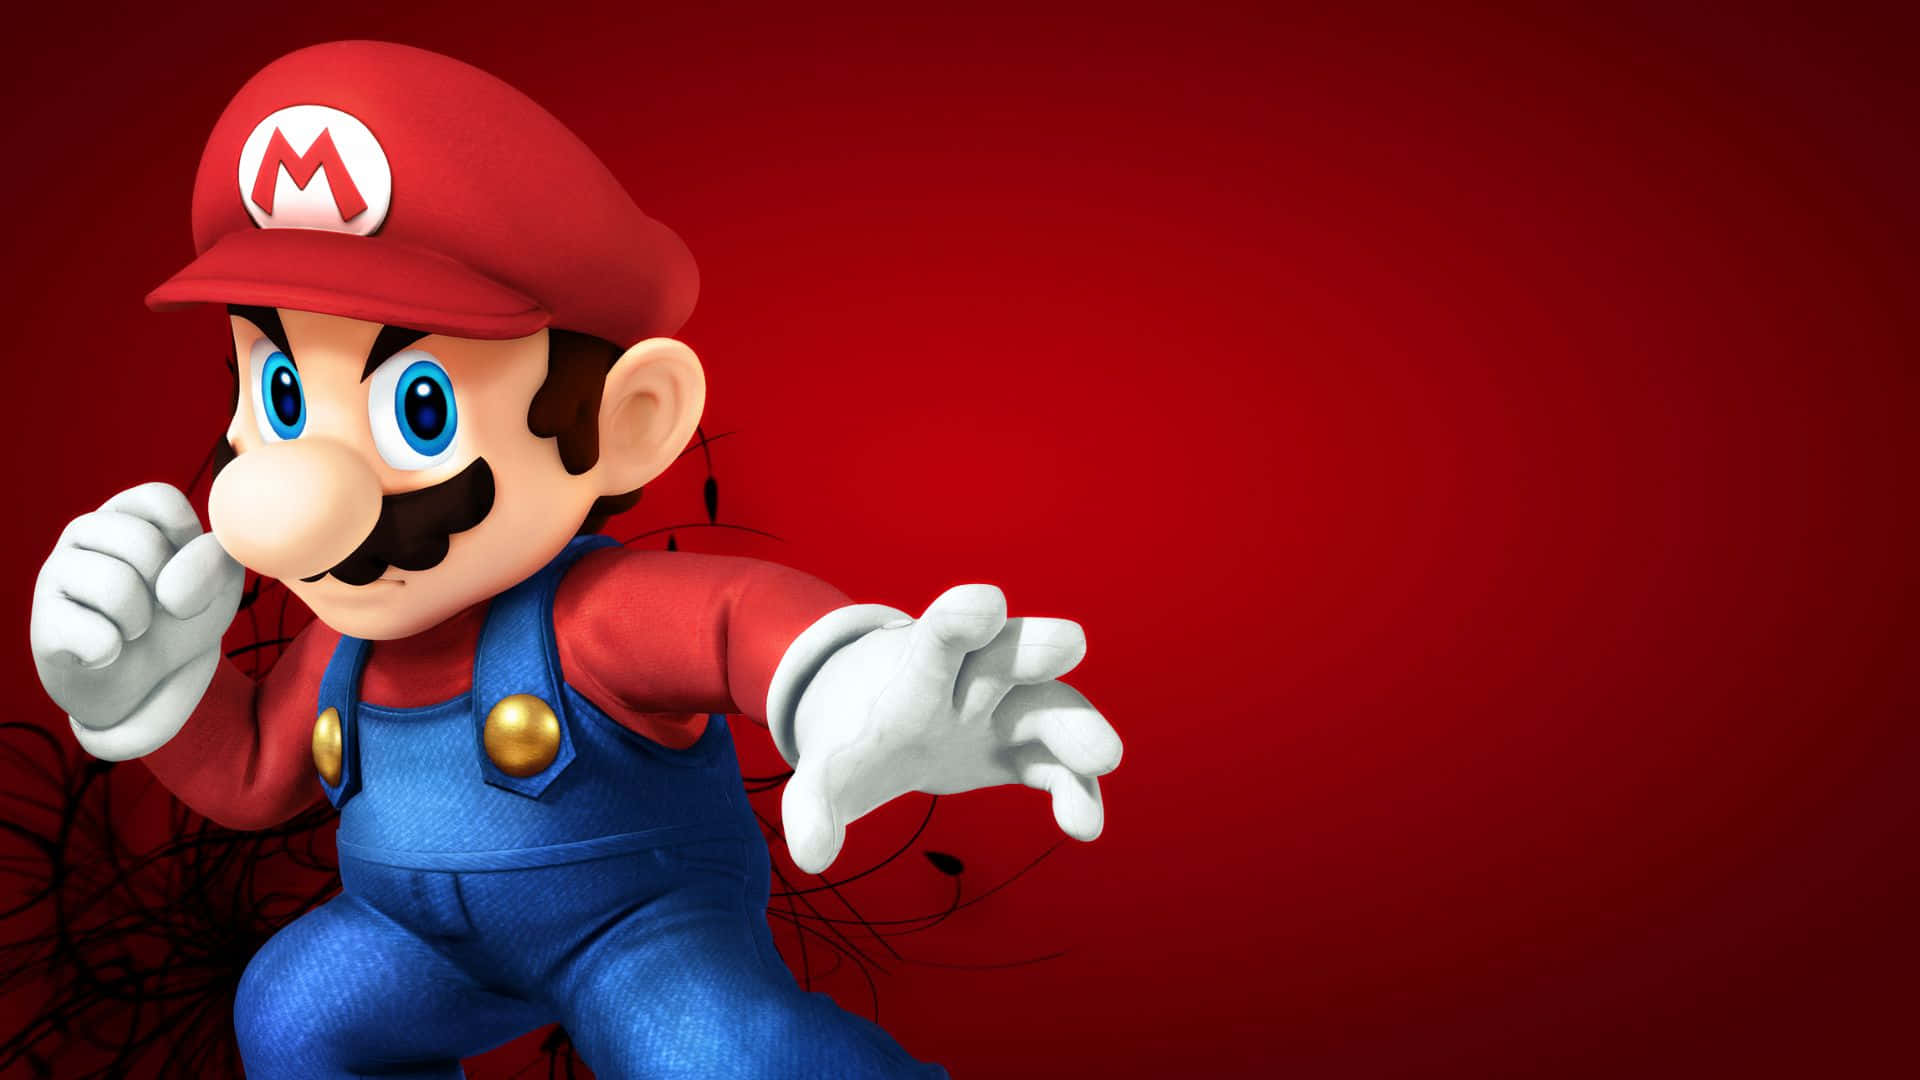 Take a Leap of Faith with Cool Mario Wallpaper